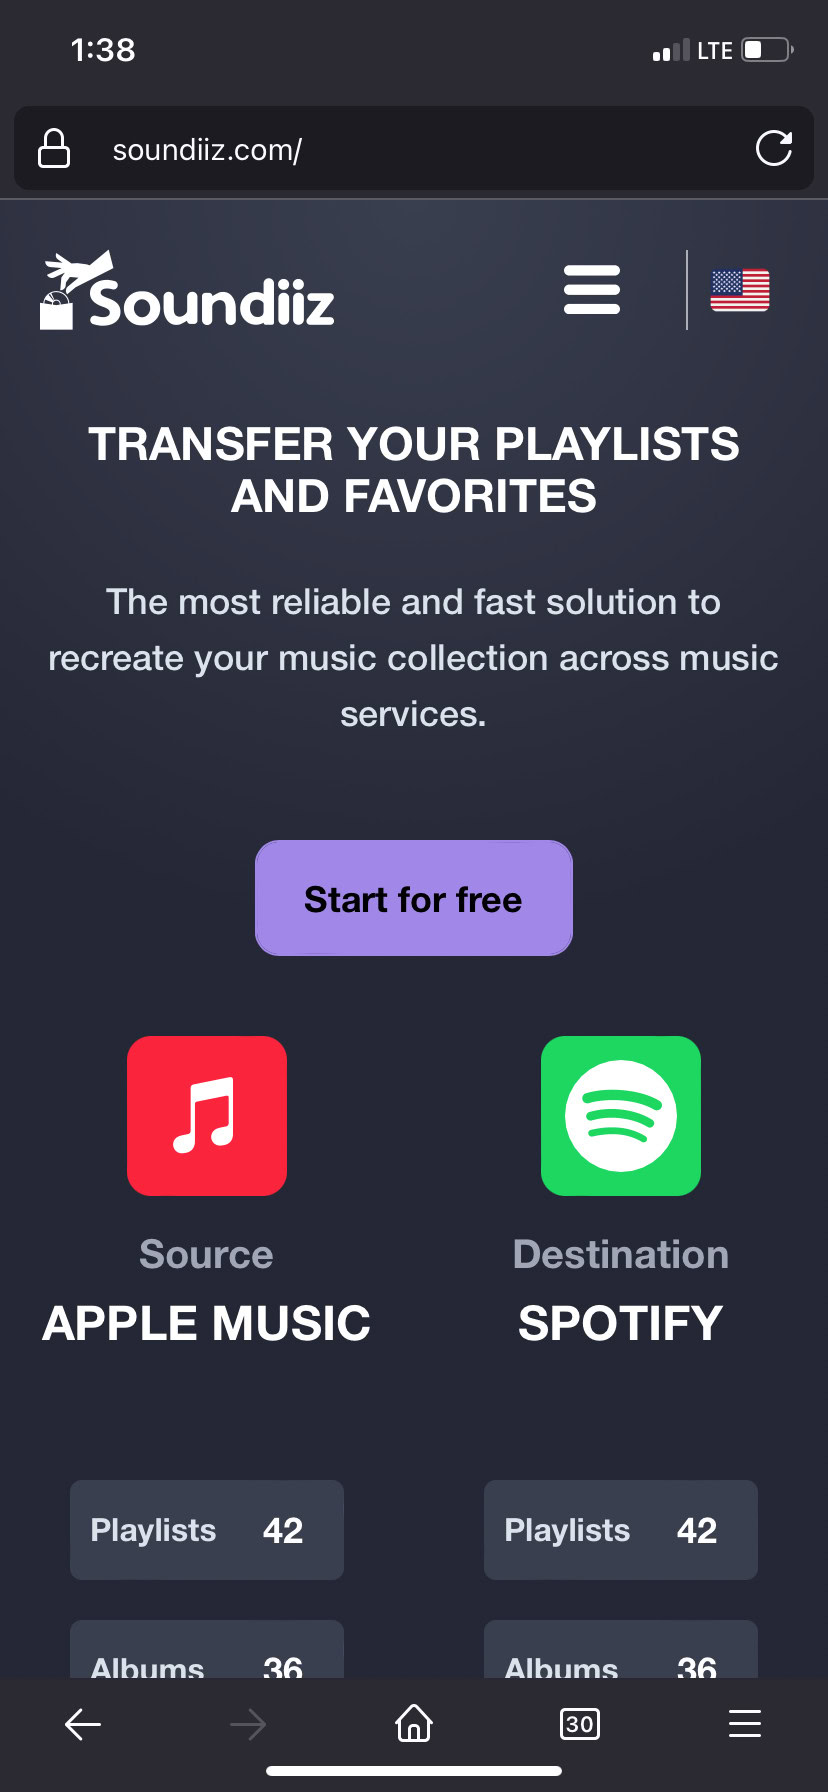 A screenshot of the Soundiiz homepage, where you can create an account to start transferring playlists.